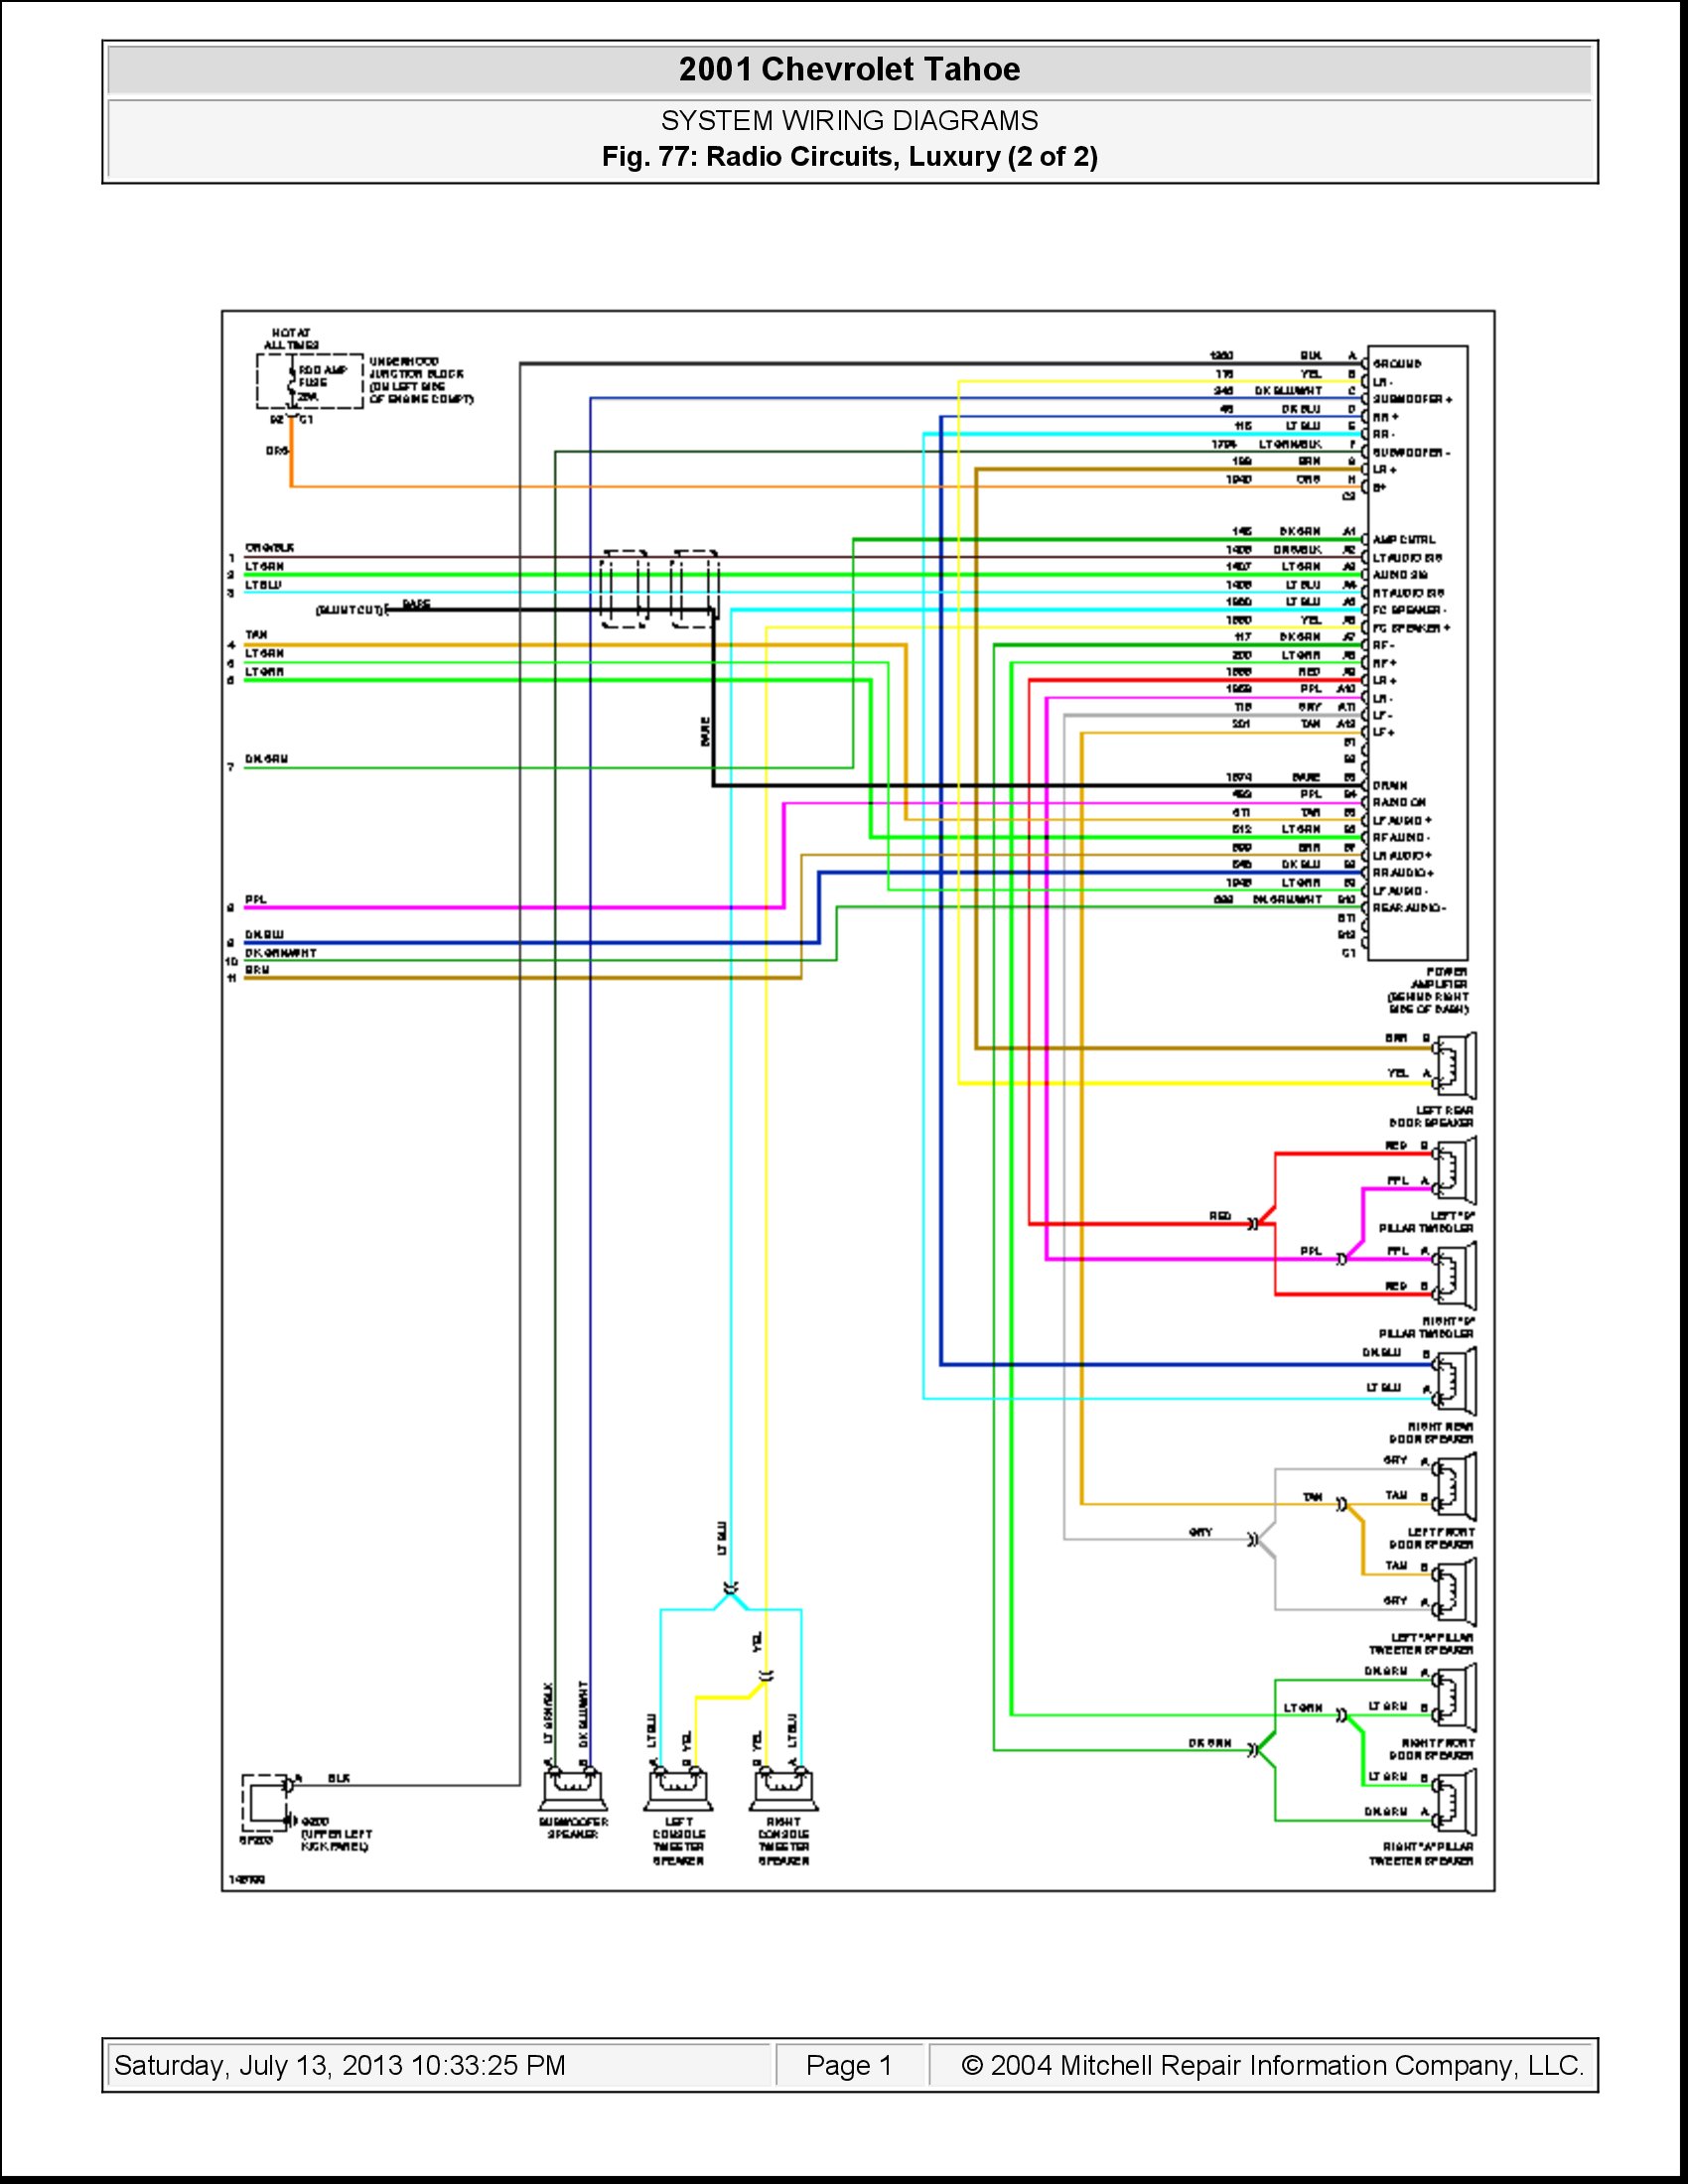 Parallel Speaker Wiring Diagram from wiringall.com